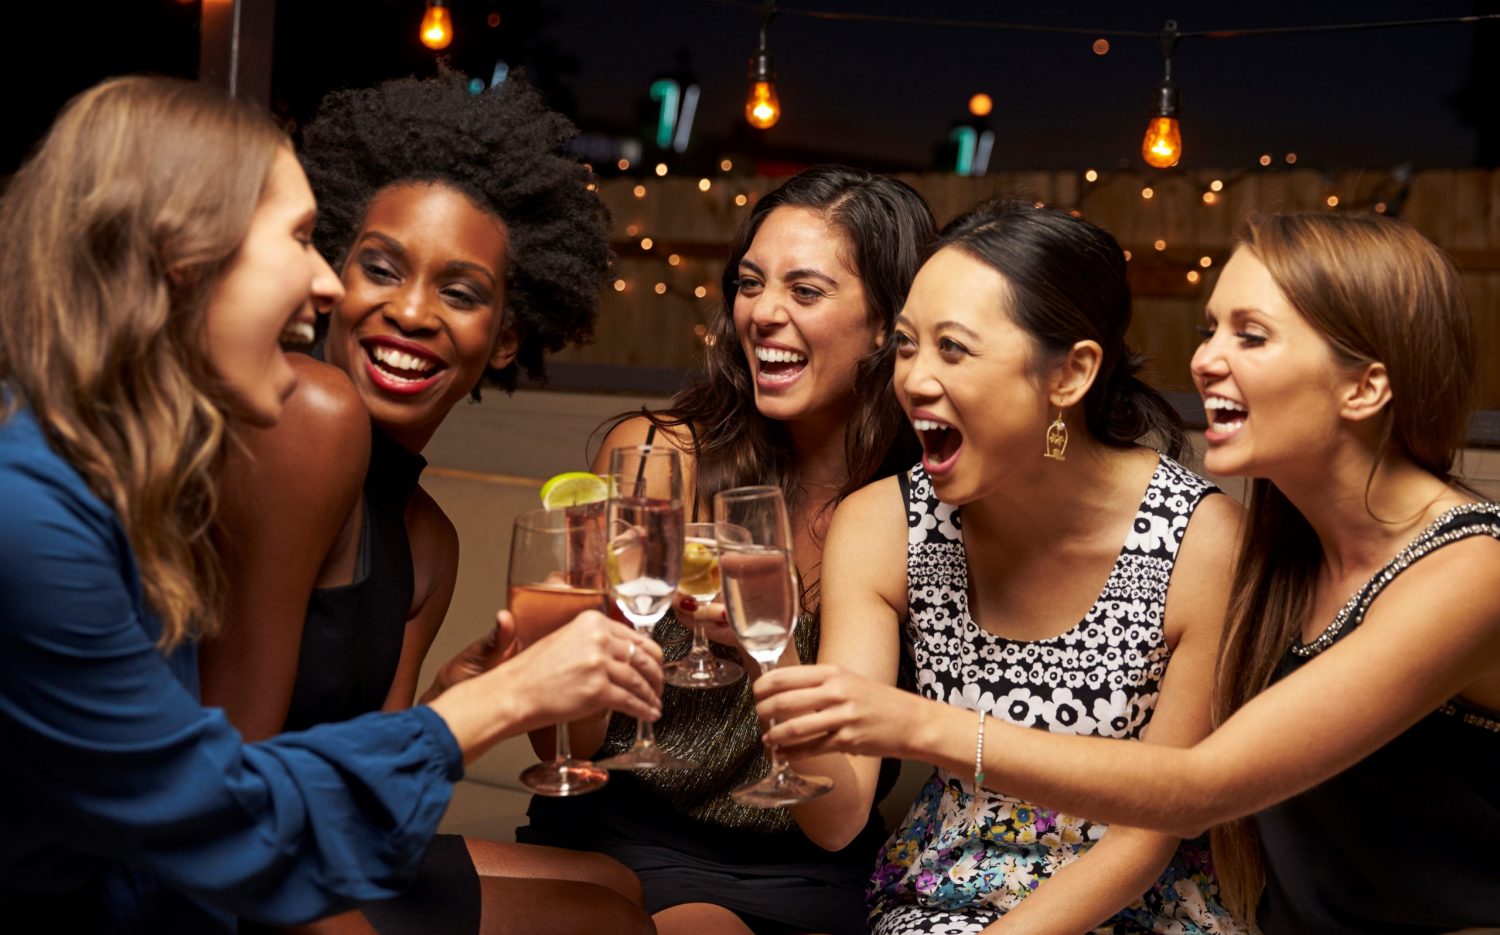 Here’s How to Plan the Best Bachelorette Party Near Indianapolis